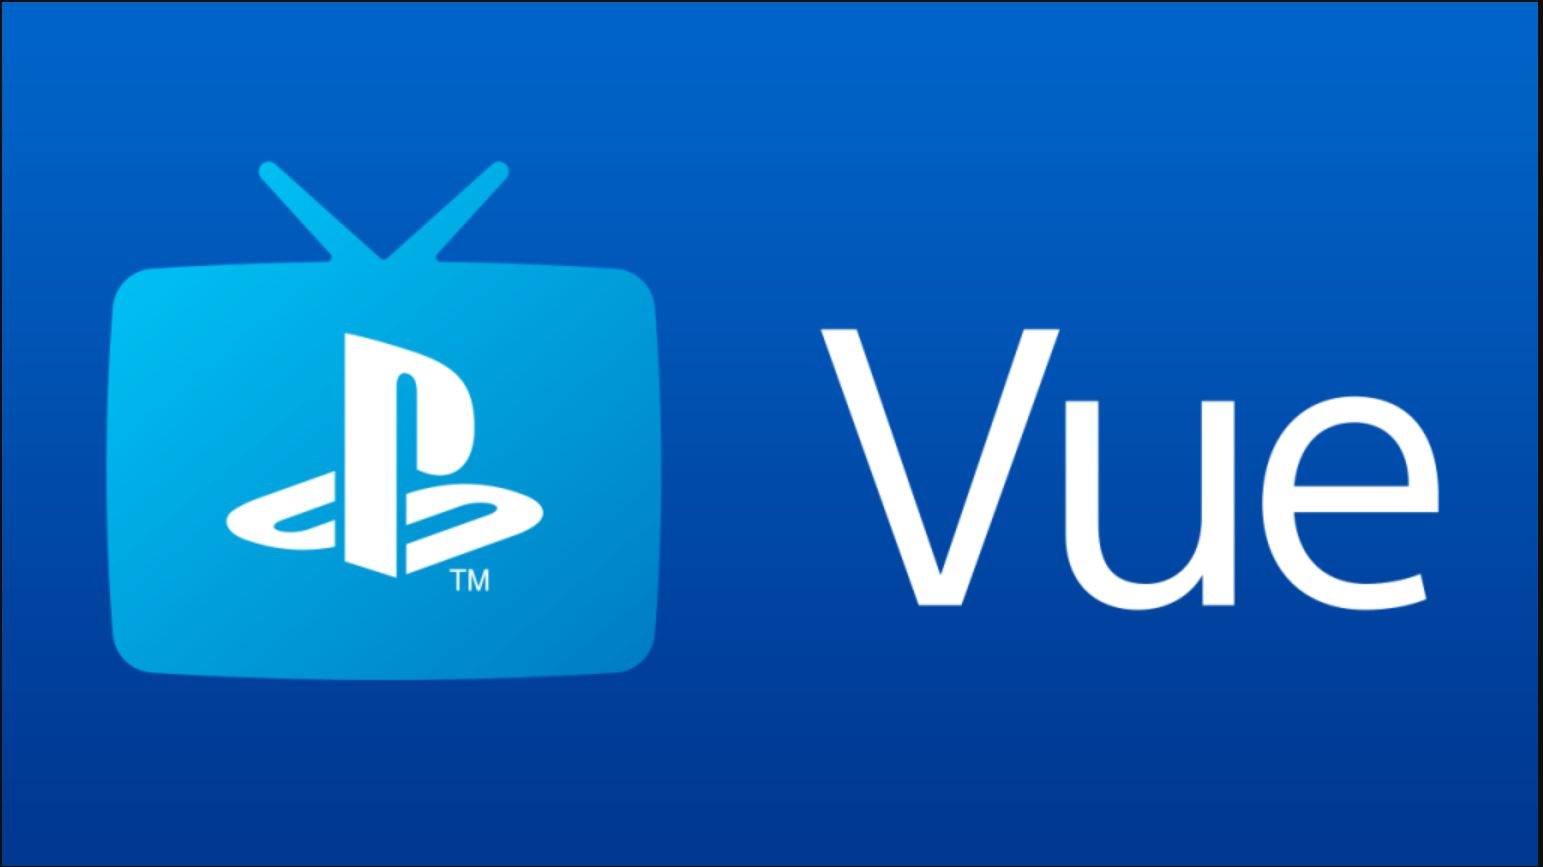 Playstation Vue freezing constantly